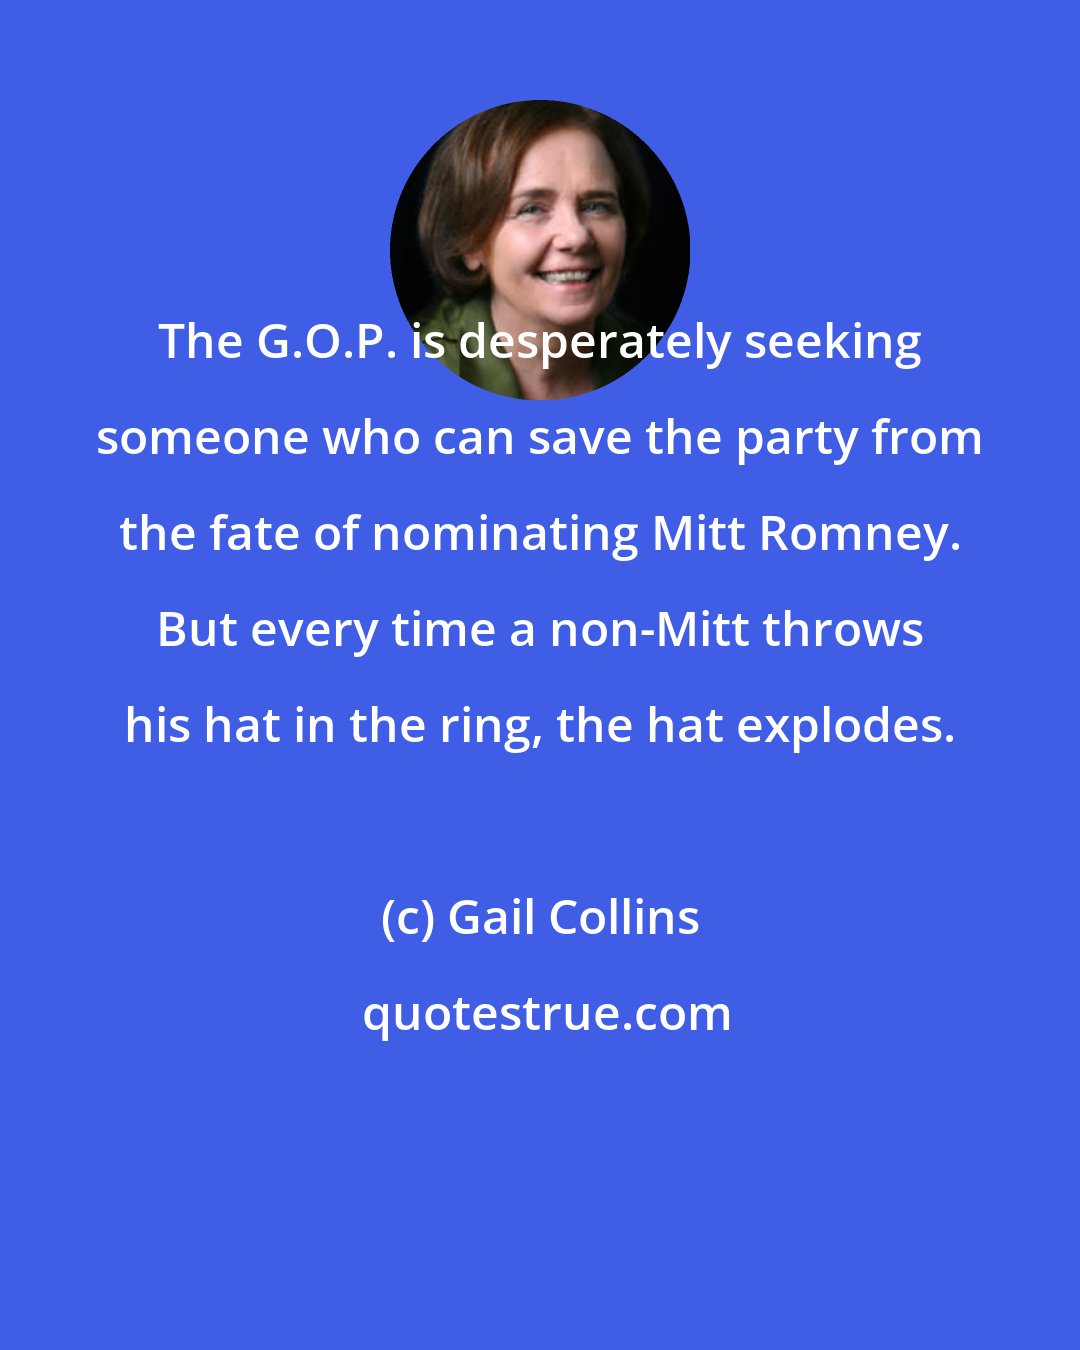 Gail Collins: The G.O.P. is desperately seeking someone who can save the party from the fate of nominating Mitt Romney. But every time a non-Mitt throws his hat in the ring, the hat explodes.